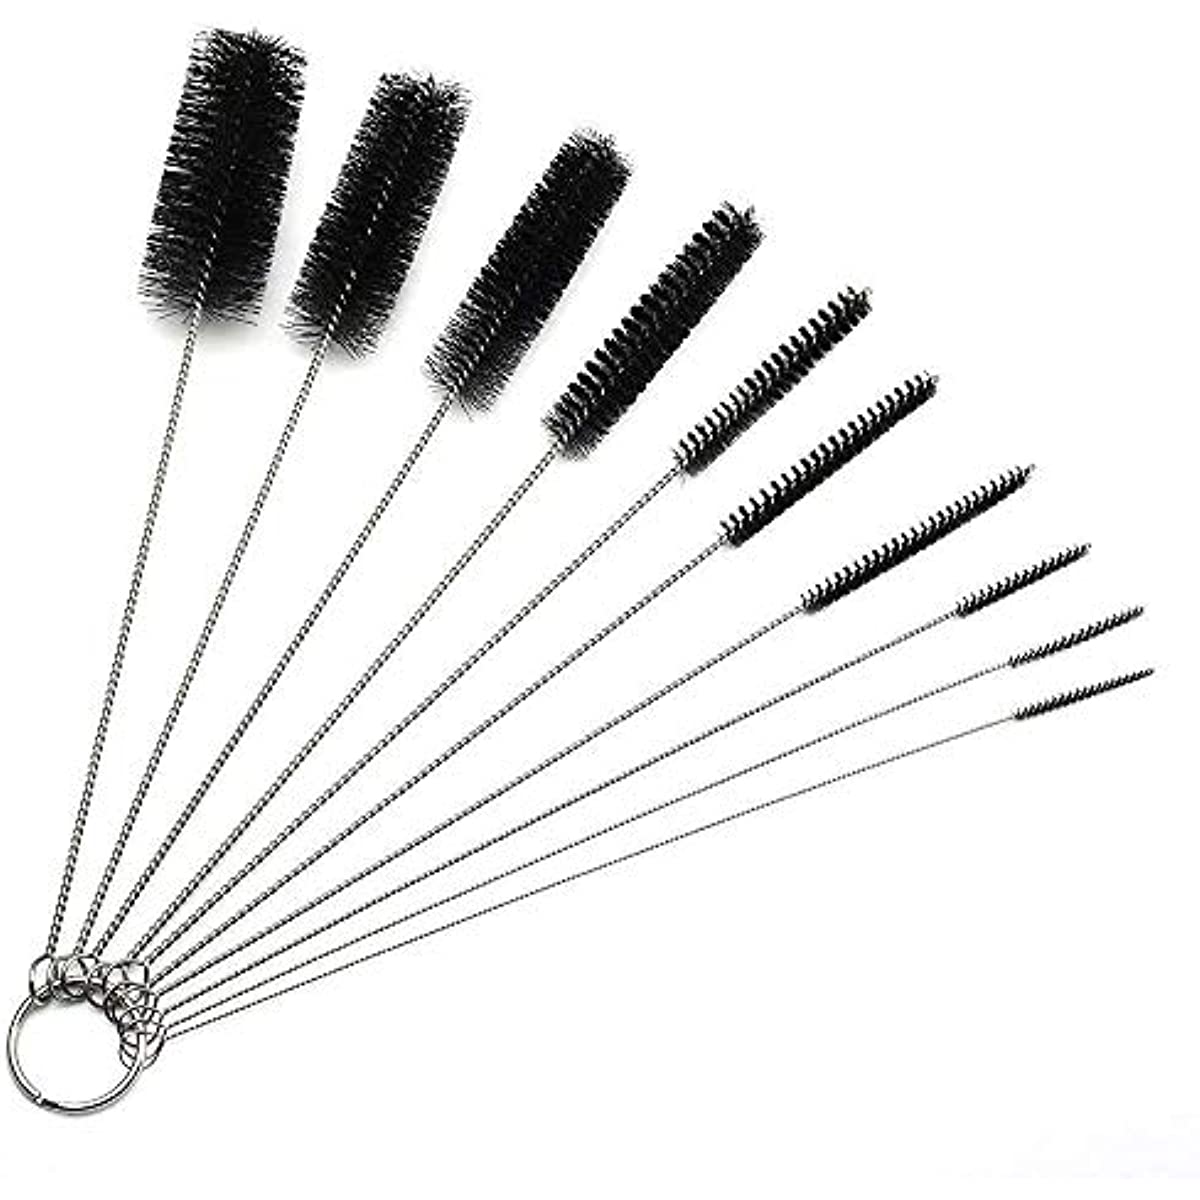 Pipe Cleaner Brush On A White Background Stock Photo, Picture and Royalty  Free Image. Image 21678456.